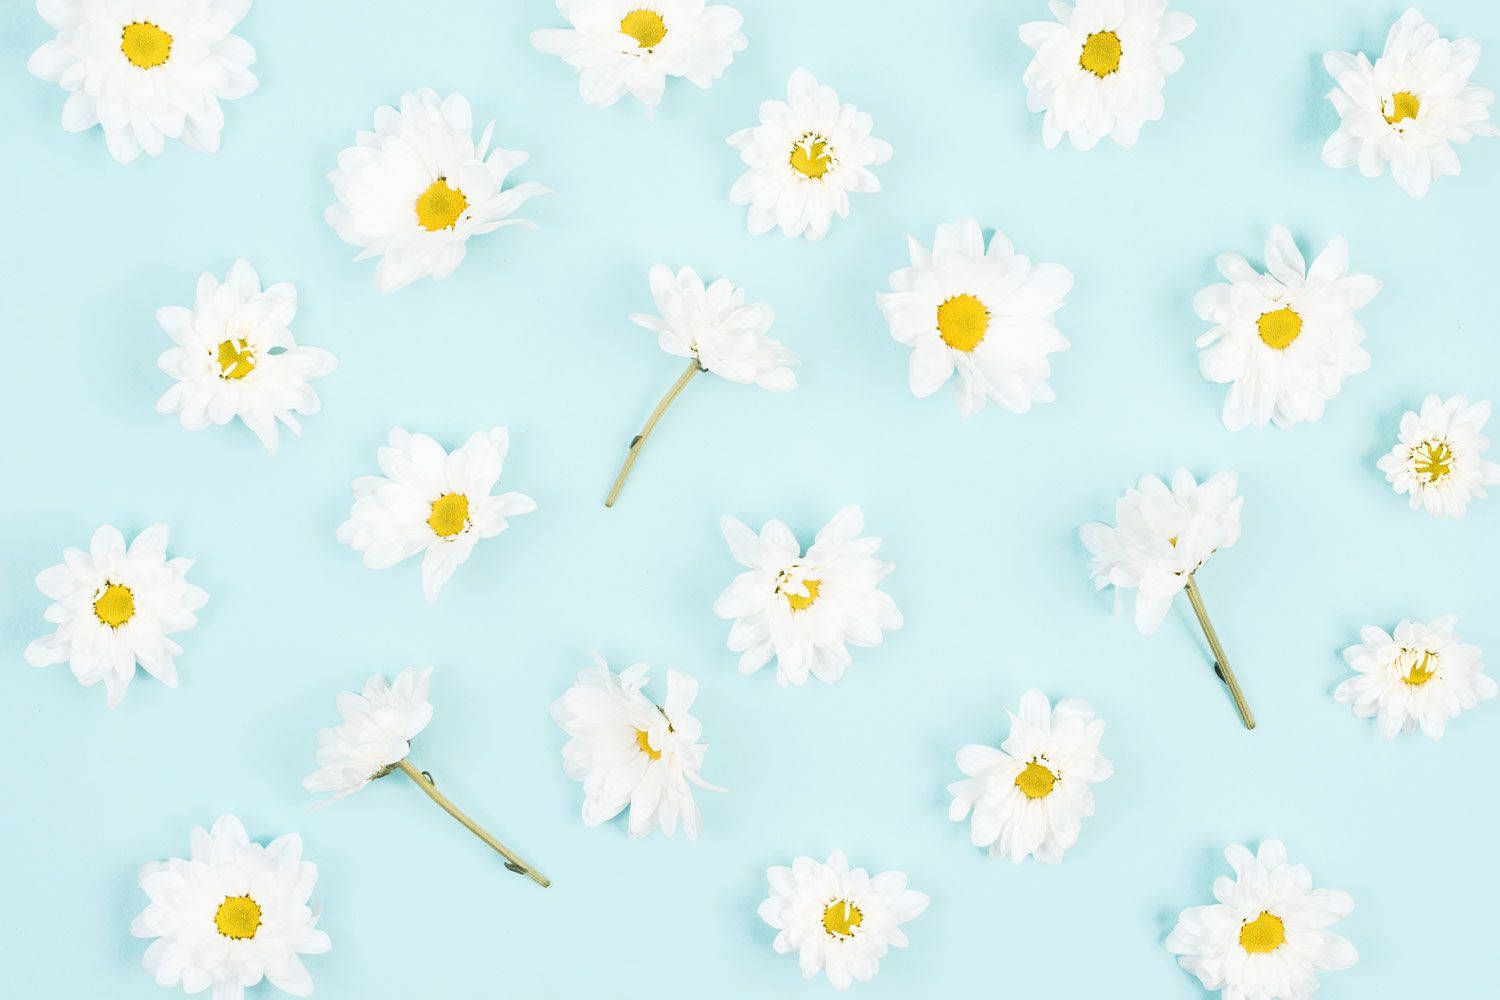 White daisies scattered on a blue background - Daisy